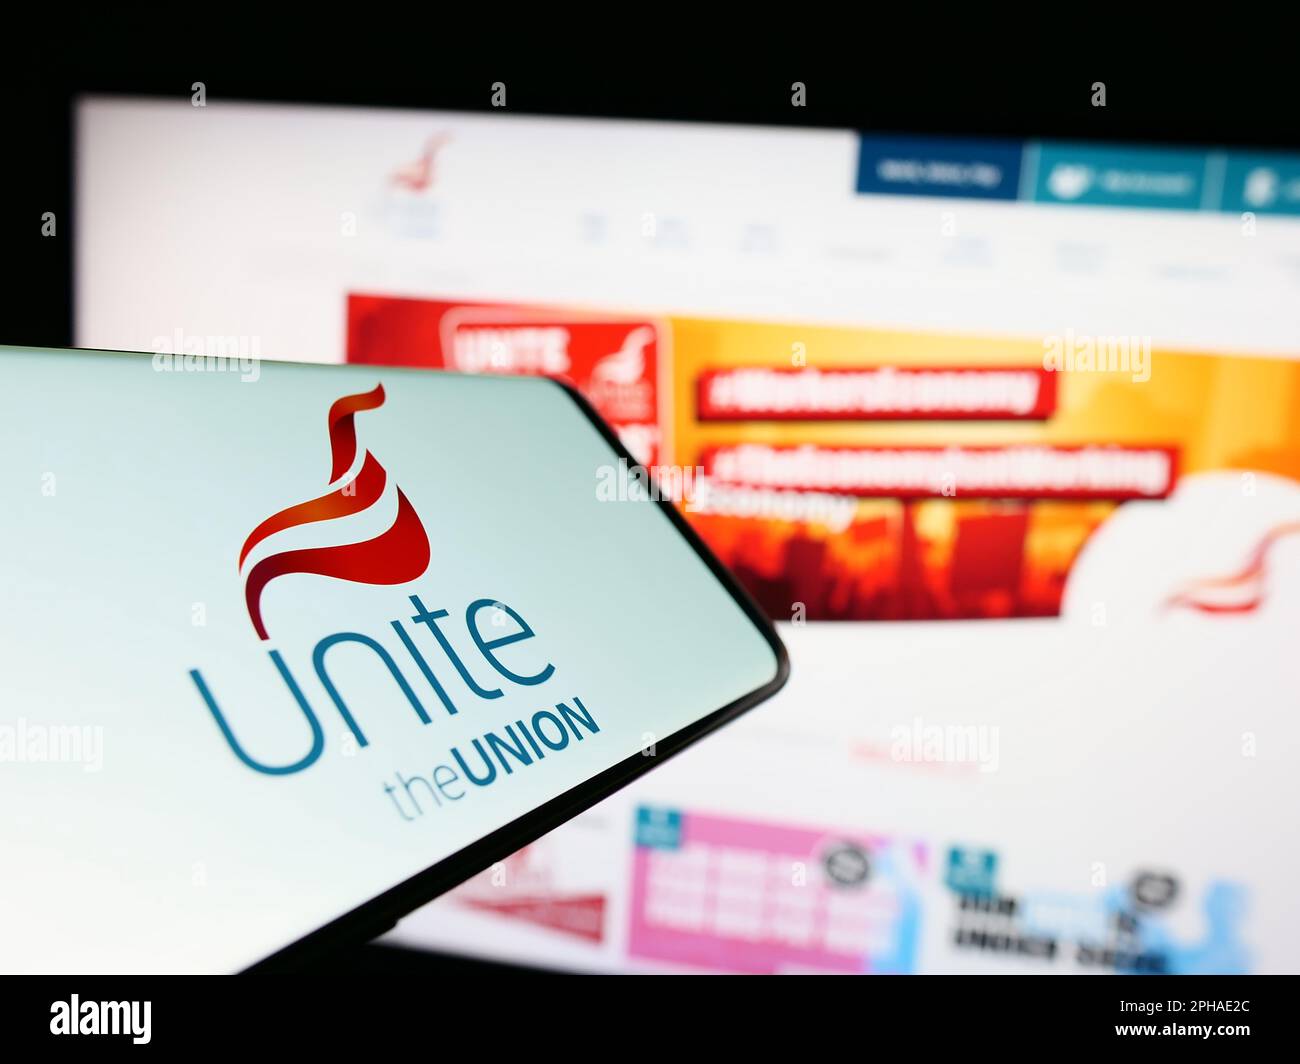 Mobile phone with logo of British trade union Unite the Union on screen in front of website. Focus on center-right of phone display. Stock Photo